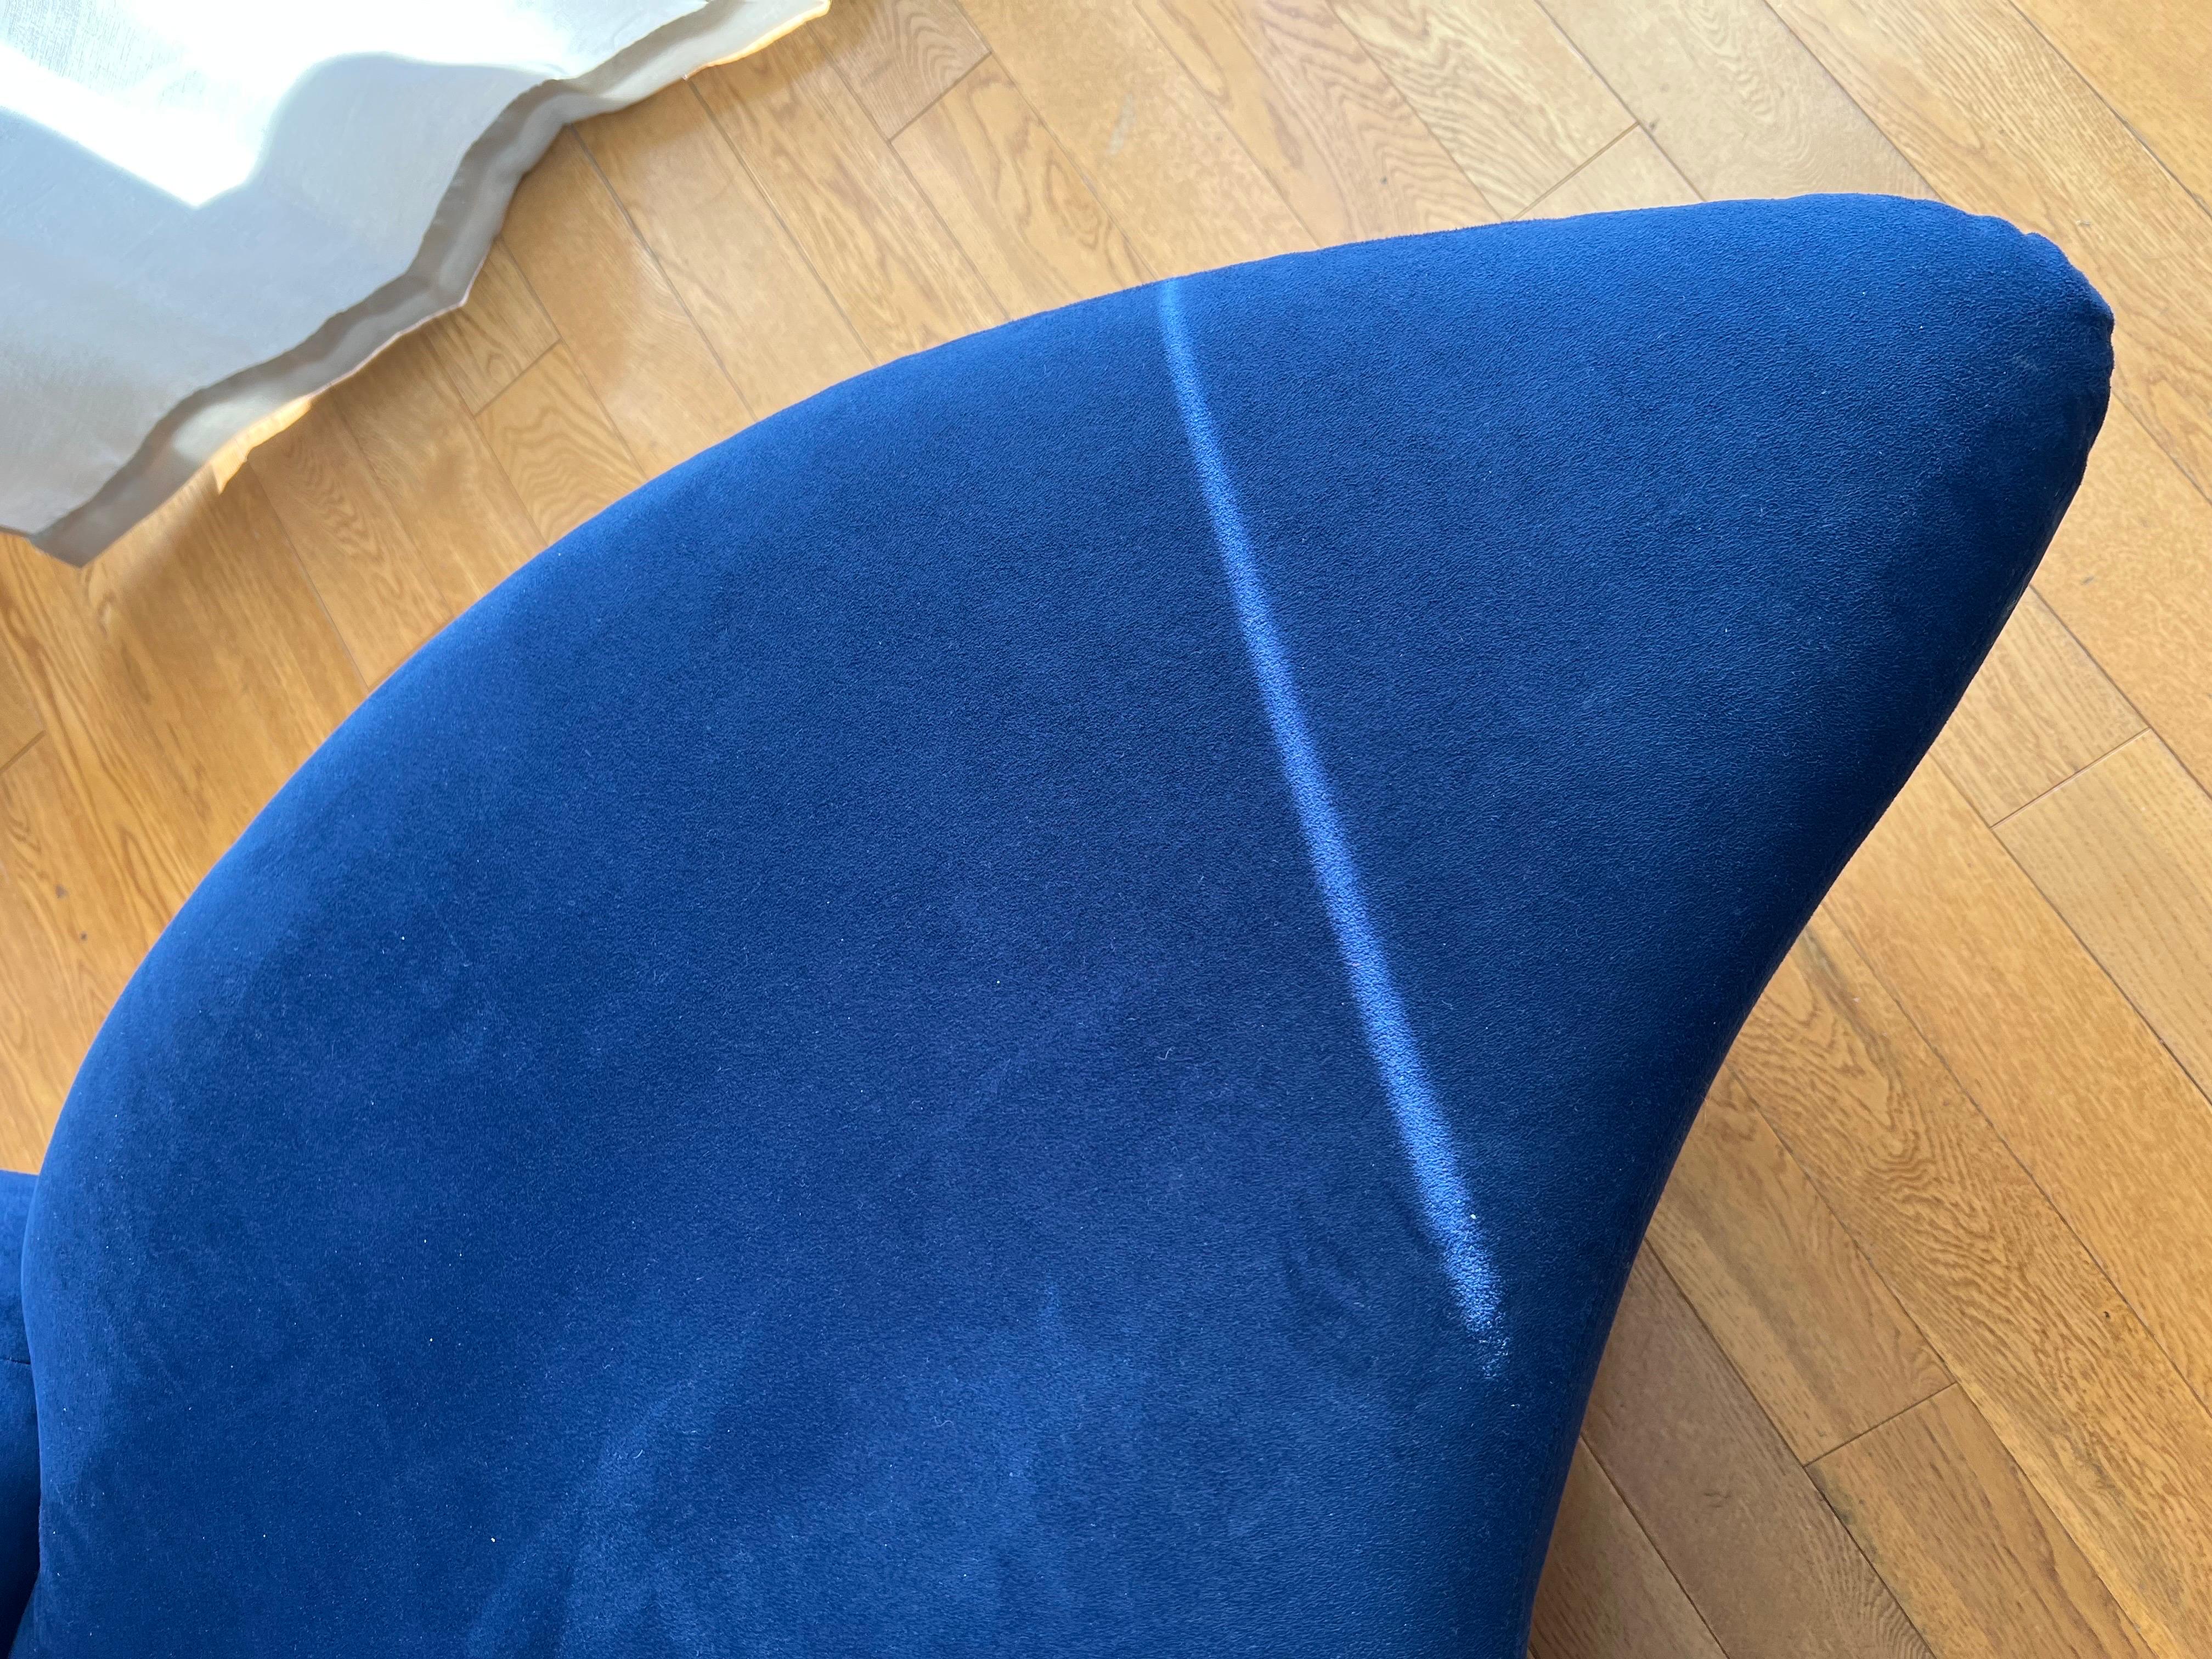 Italian Midcentury Bilboa Curved Sofa in Royal Blue, attributed to Vladimir Kagan  For Sale